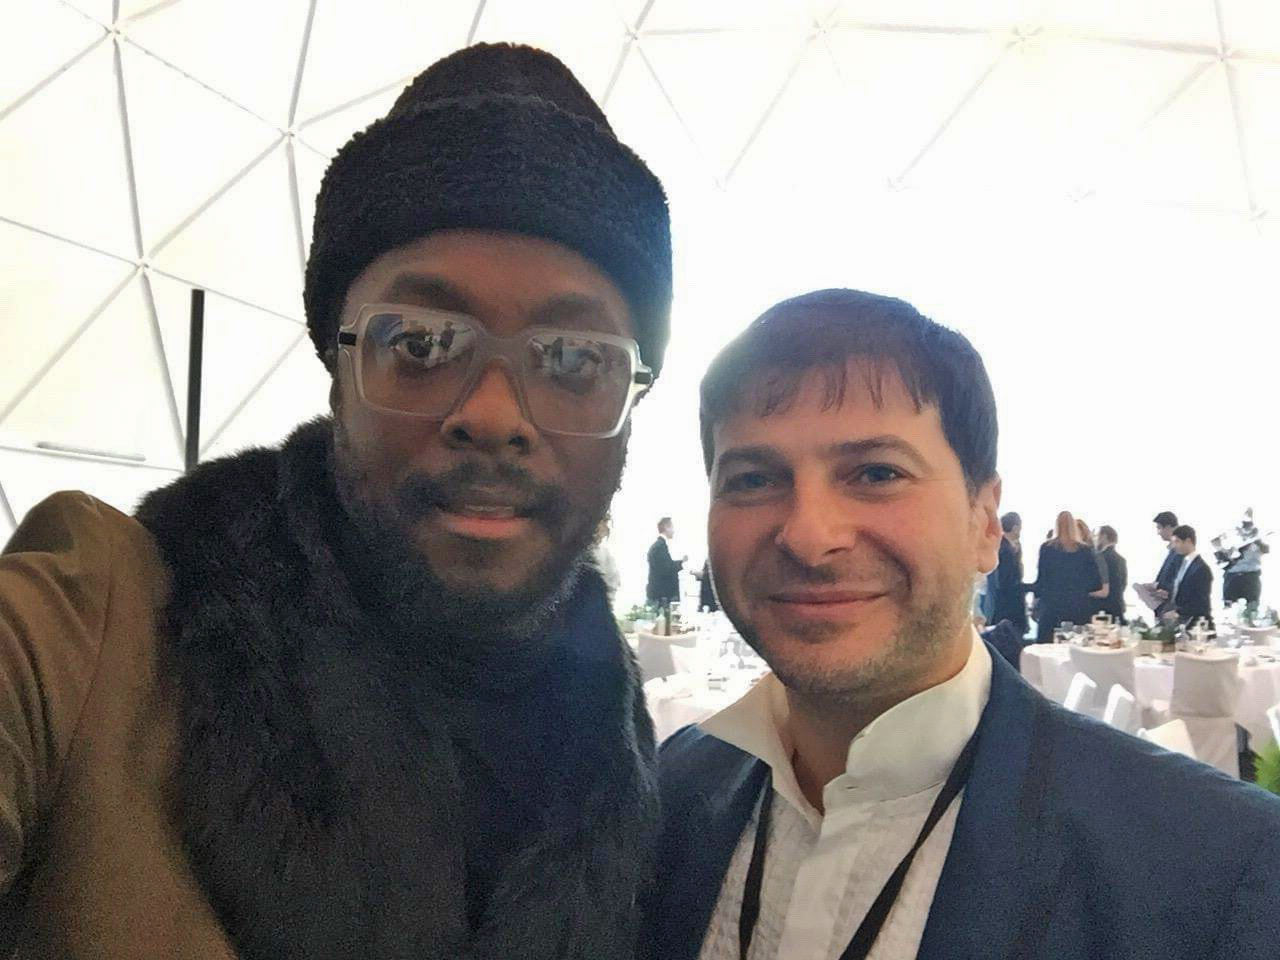 Plamen Russev with Will.I.am